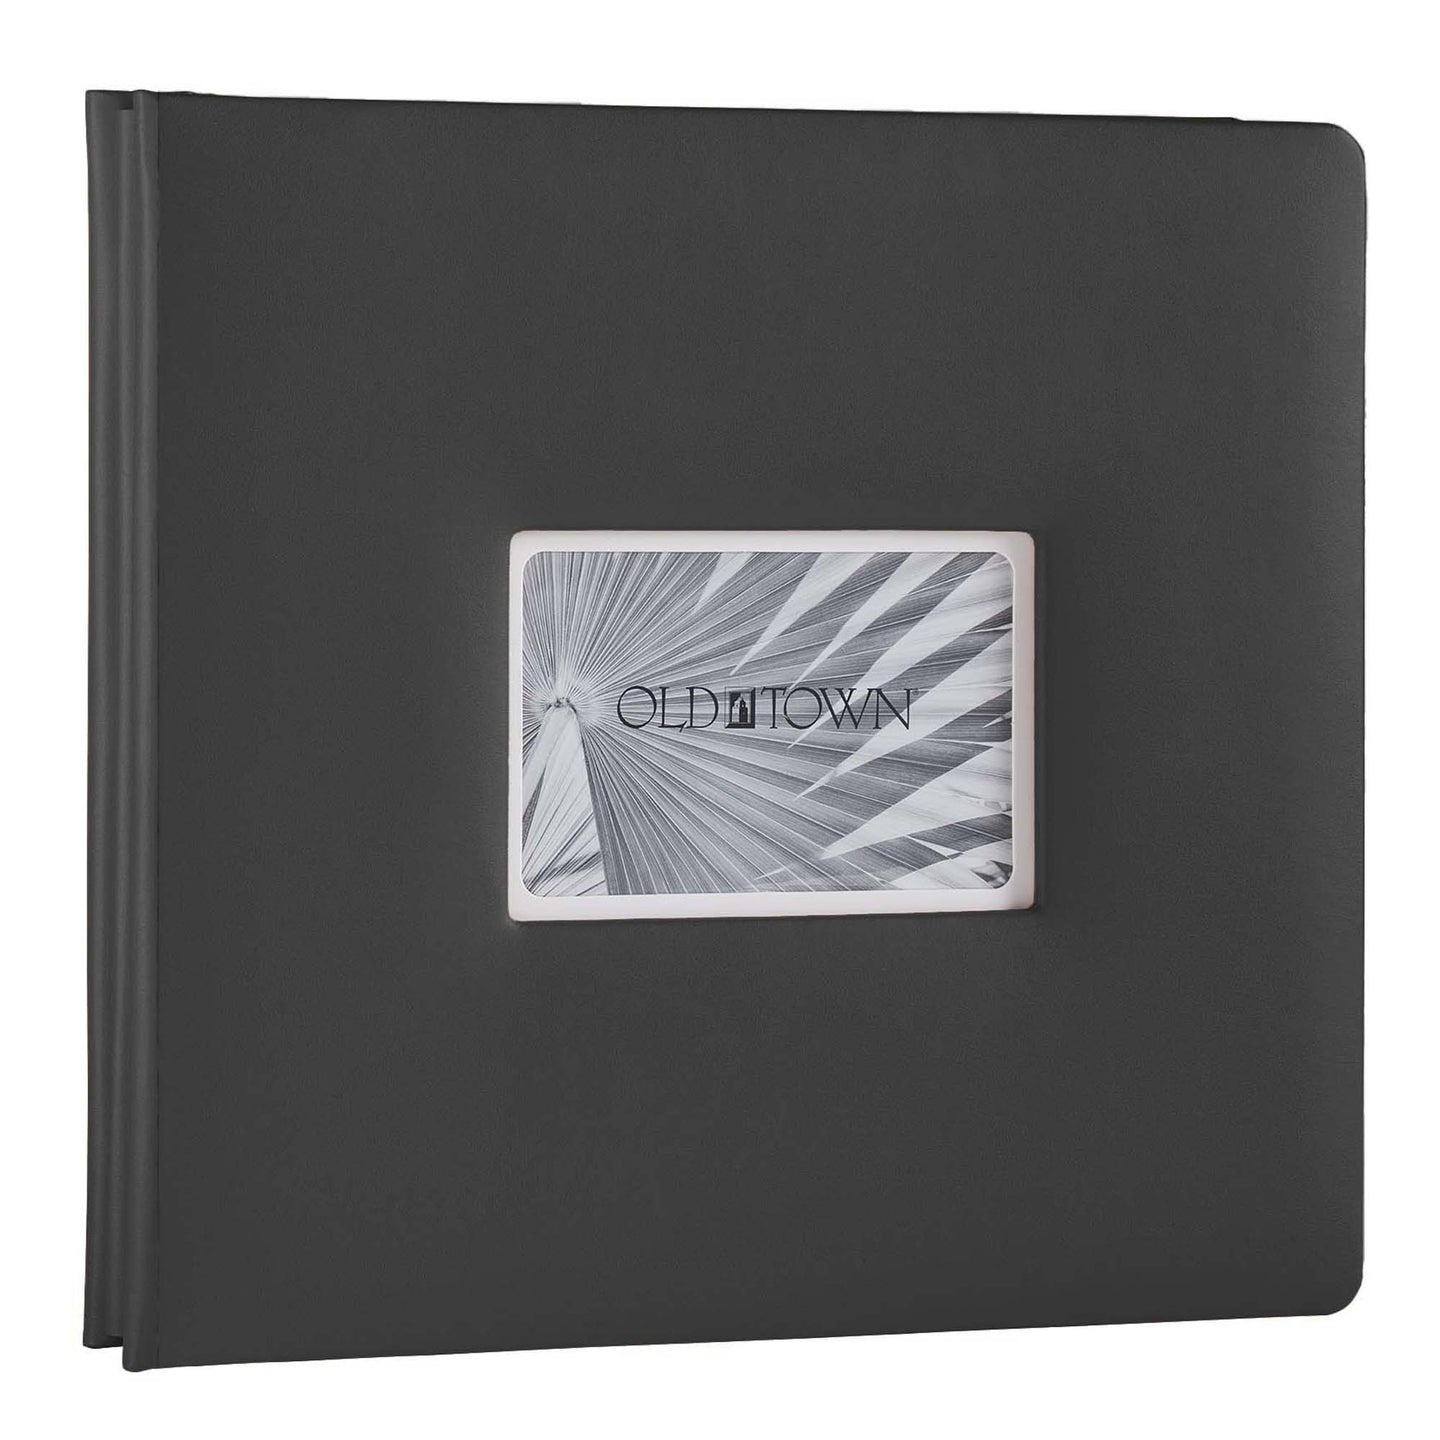 Single black leather scrapbook with 4x6 inch window for displaying a photo or other item.